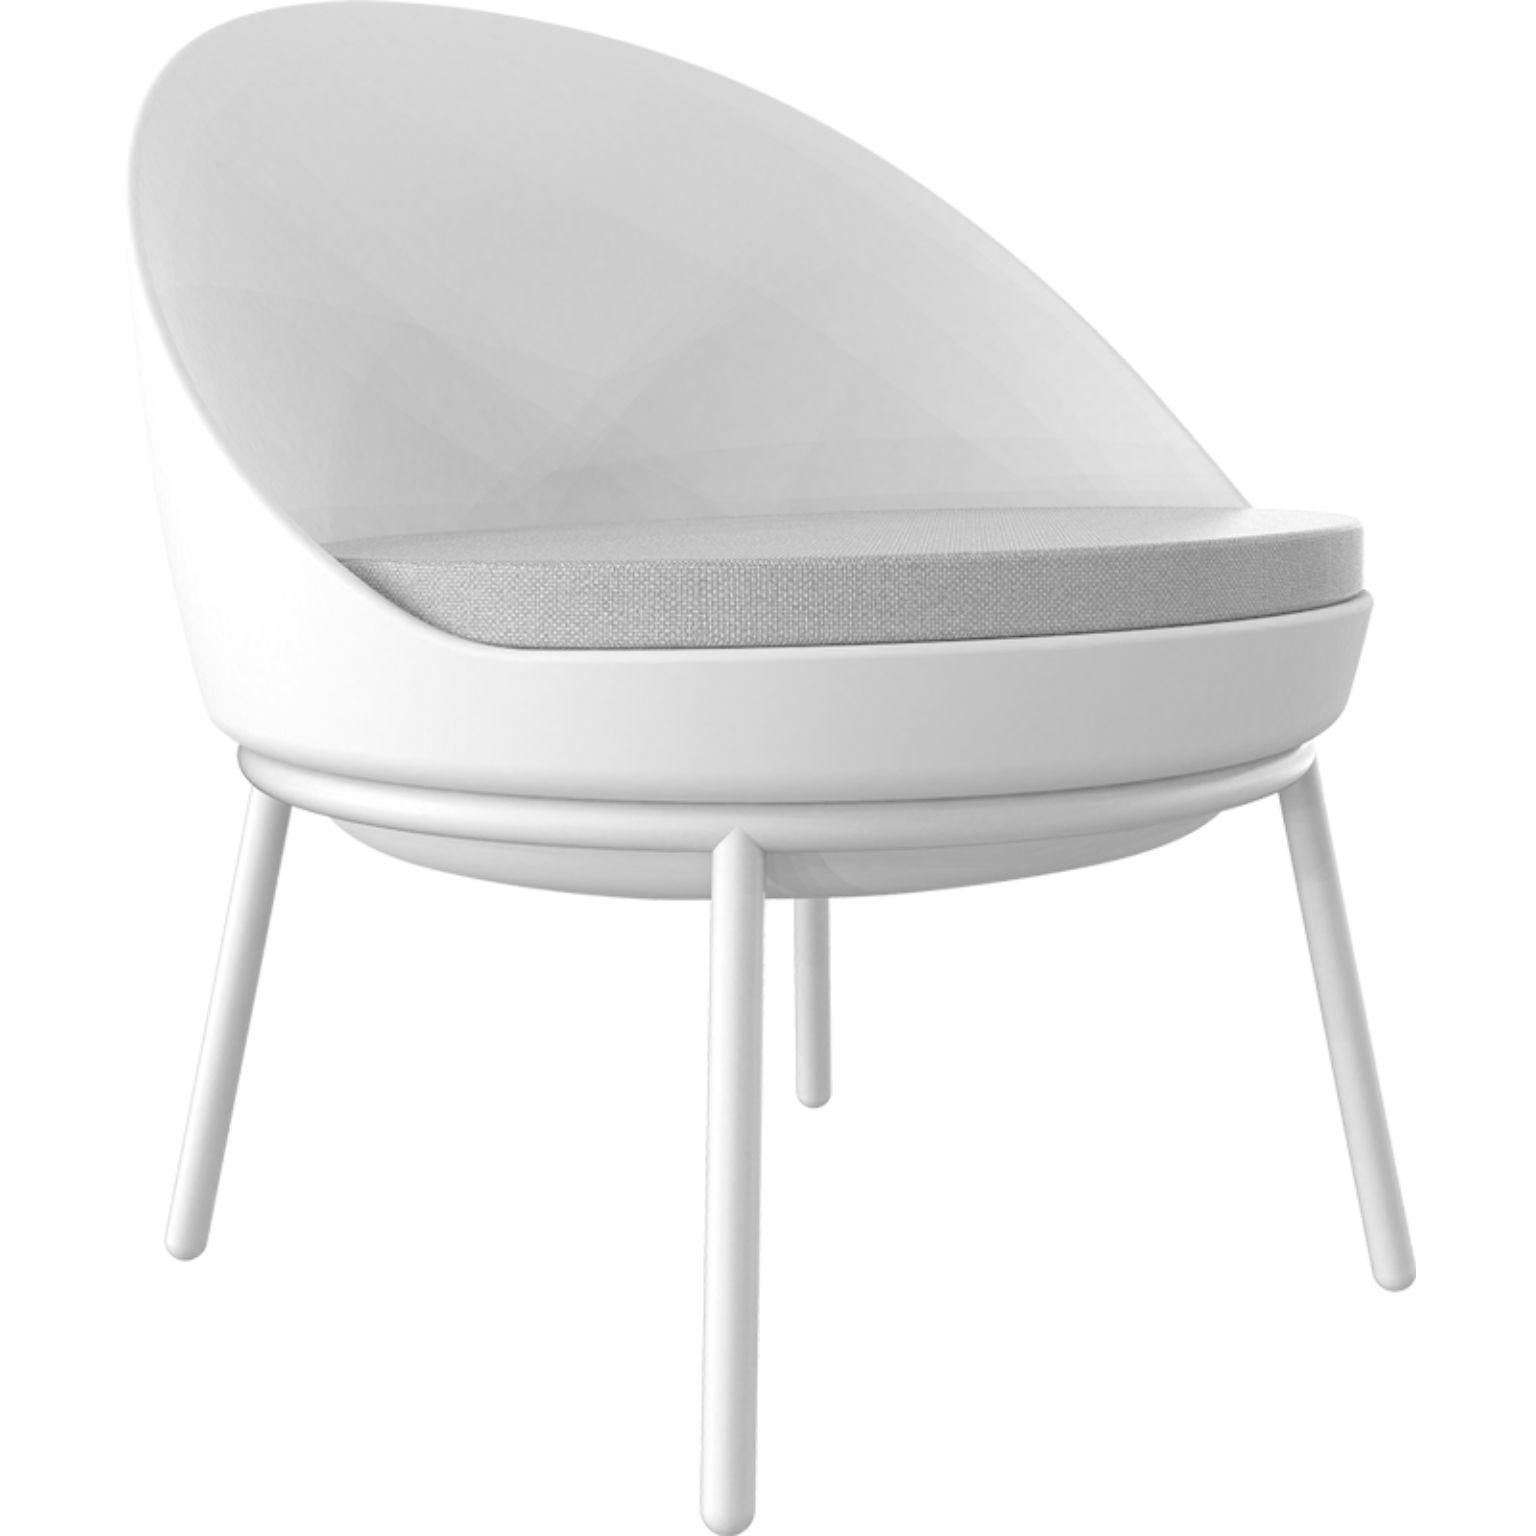 Lace white lounge chair by Mowee
Dimensions: D 70 x W 66 x H 75.5 cm
Material: Polyethylene, stainless steel
Weight: 10.5 kg
Also Available in different colours and finishes.

Lace is a collection of furniture made by rotomoulding. Its shape